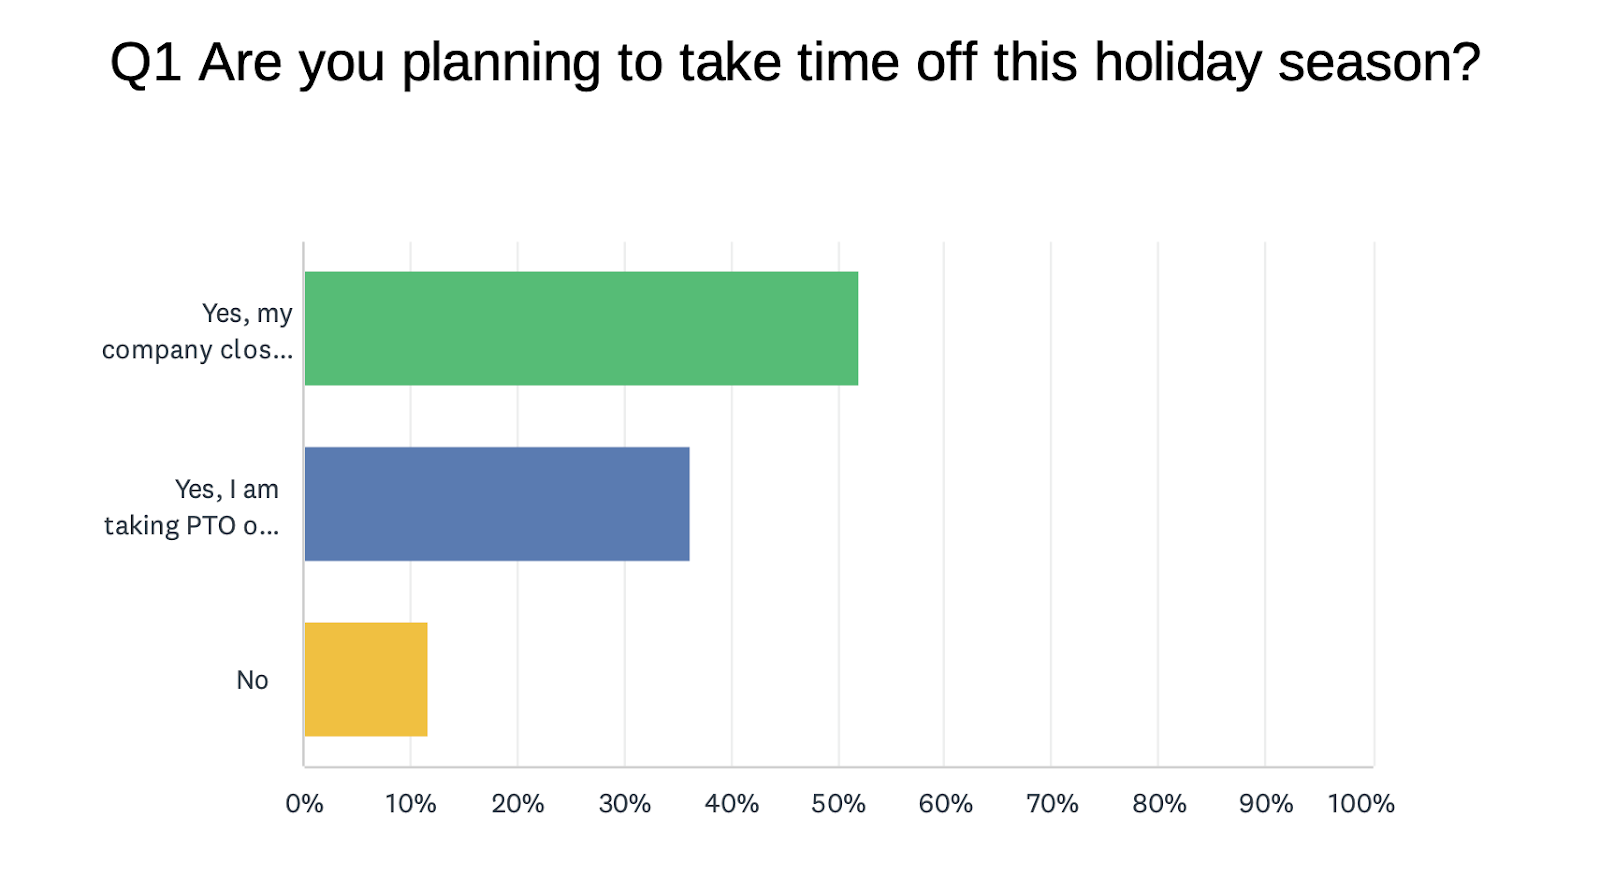 "Q1 Are you planning to take time off this holiday season?" followed by a bar chart with survey results (~50% "yes, my company clos...", ~45% "yes, I am taking PTO o...", and ~12% "no")